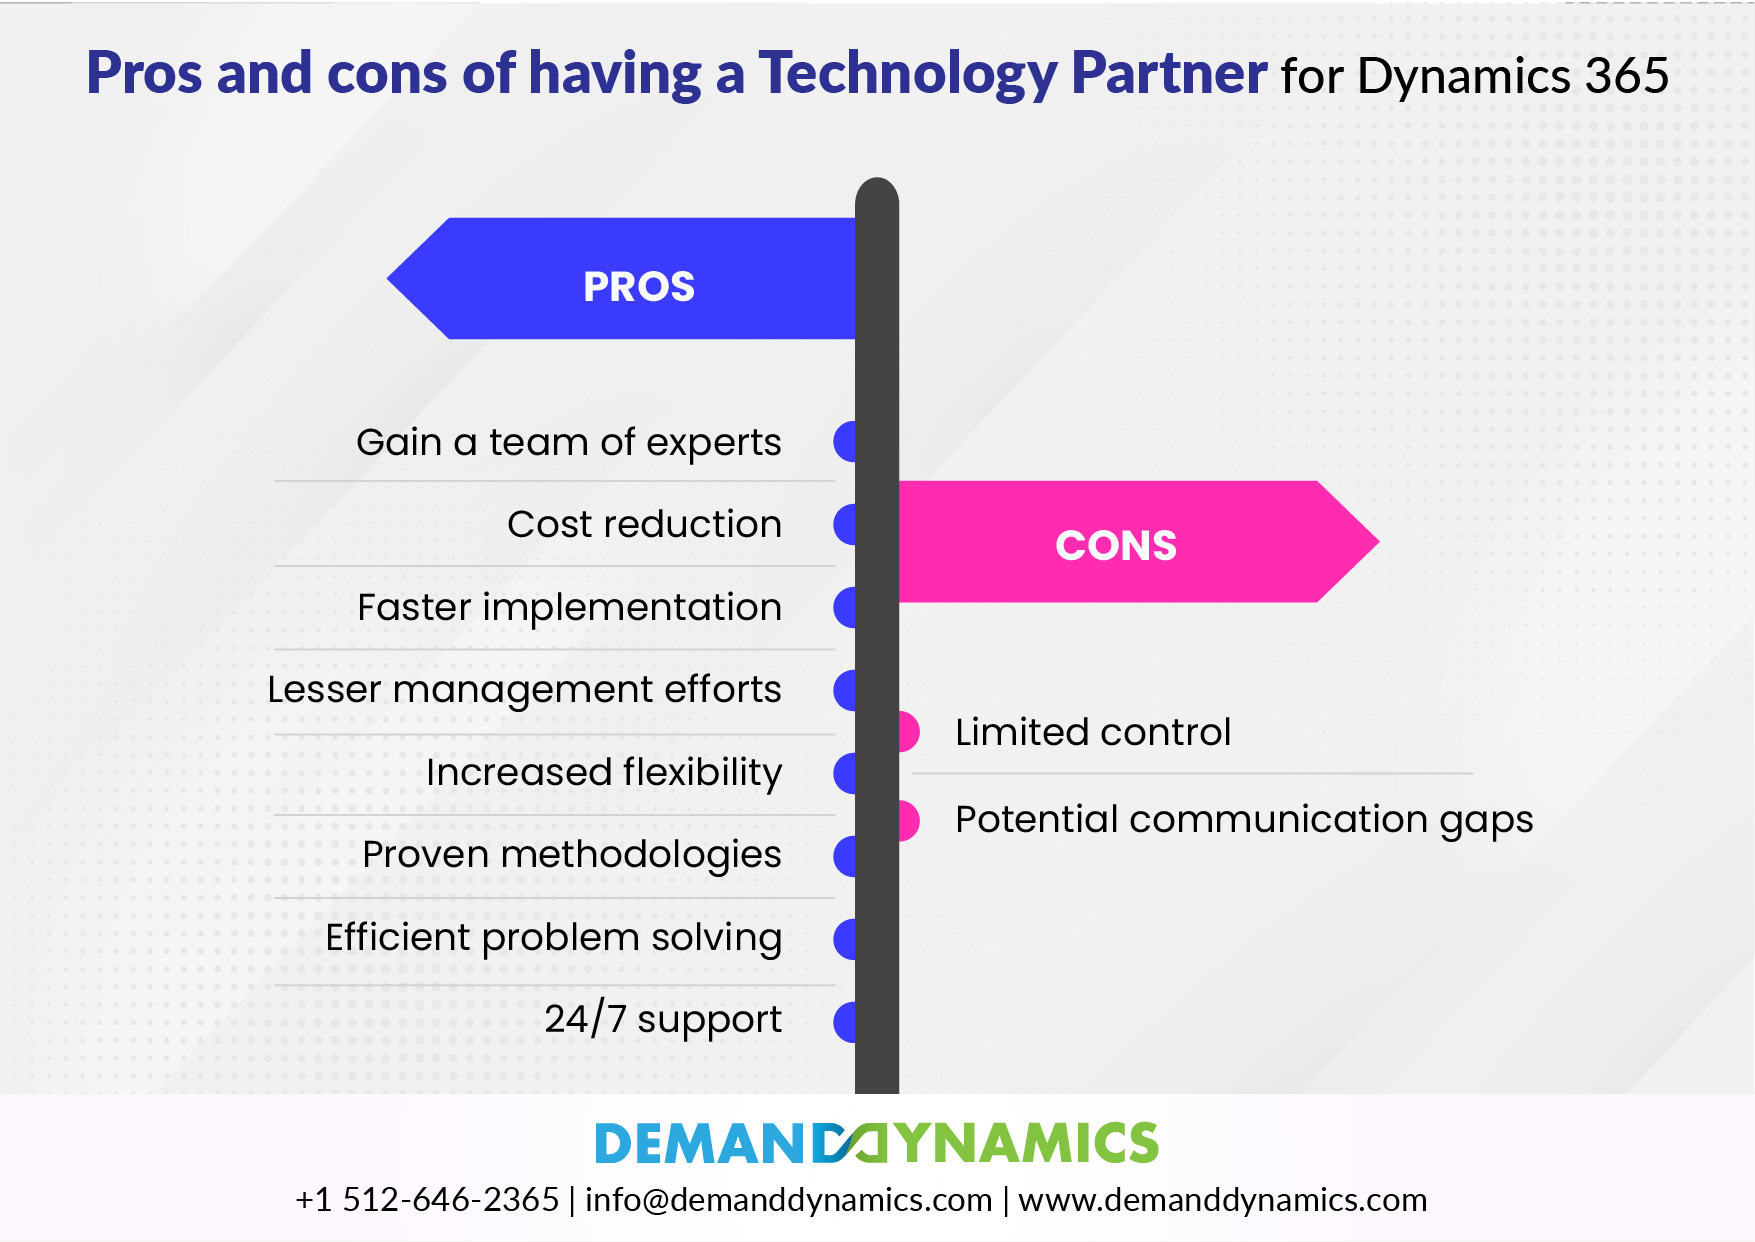 Pros and Cons of Technology Partner